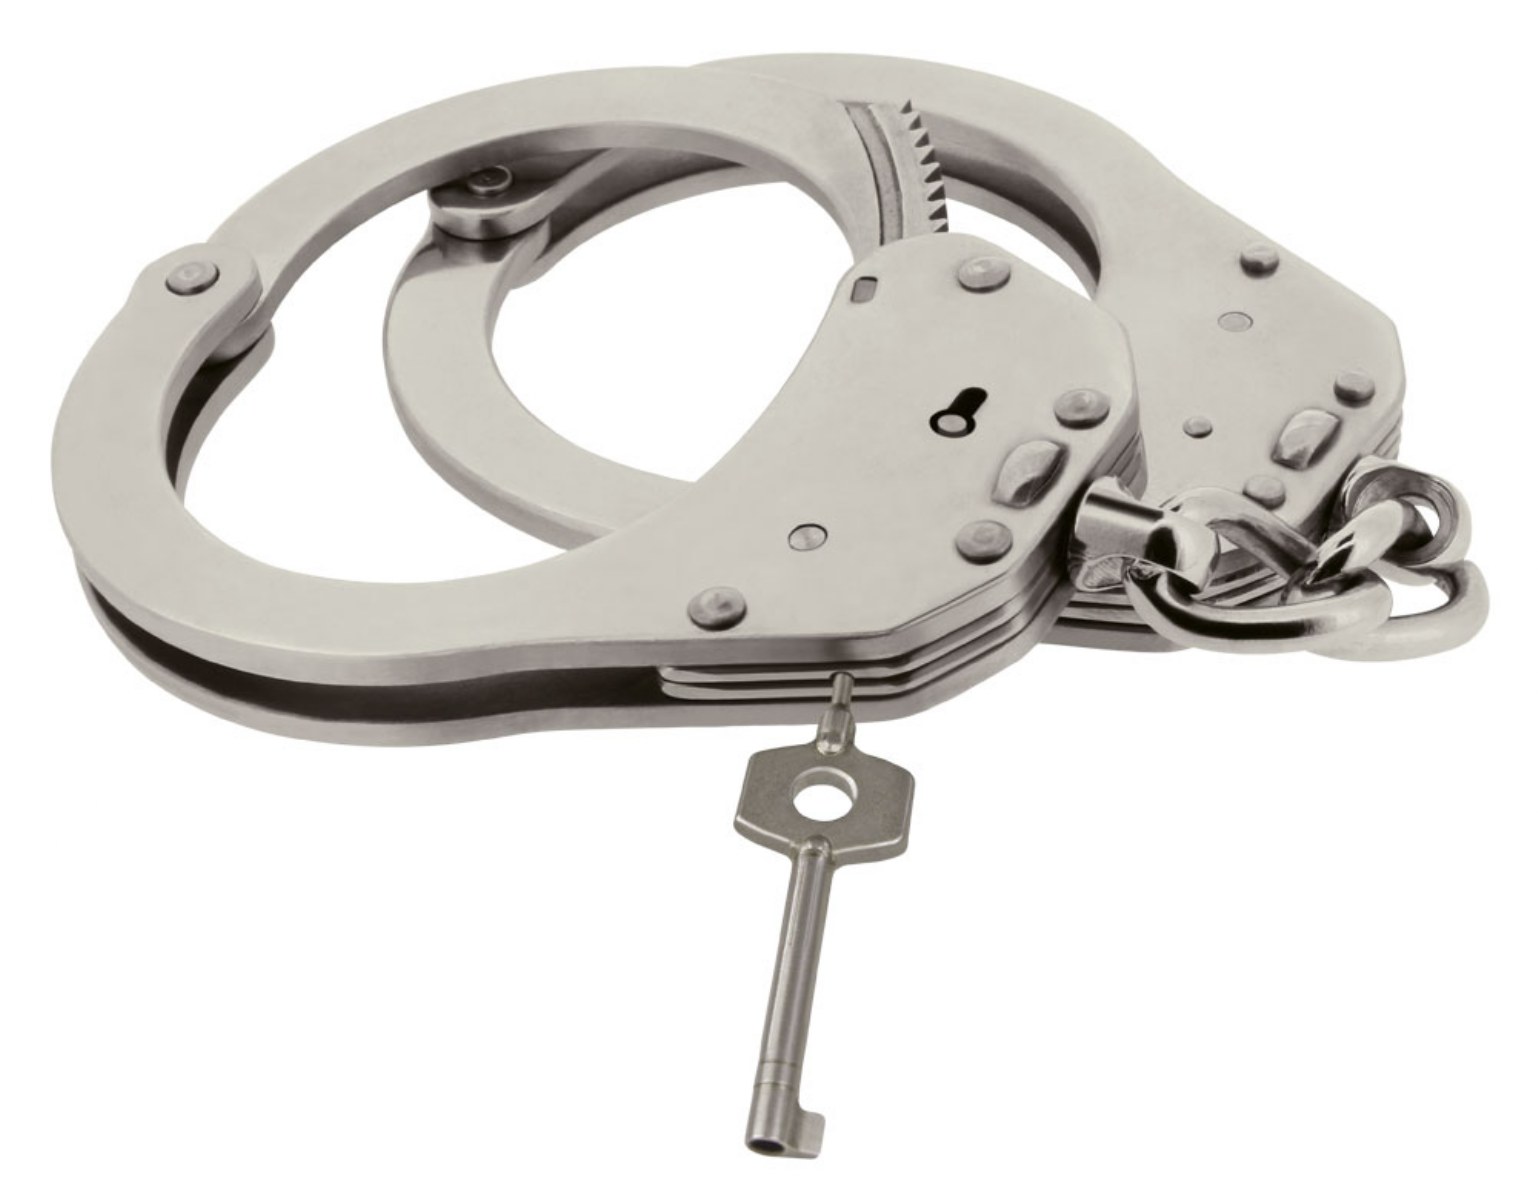 ESP® Czech Police Heavy Duty Professional Stainless Steel Handcuffs - NO TOY